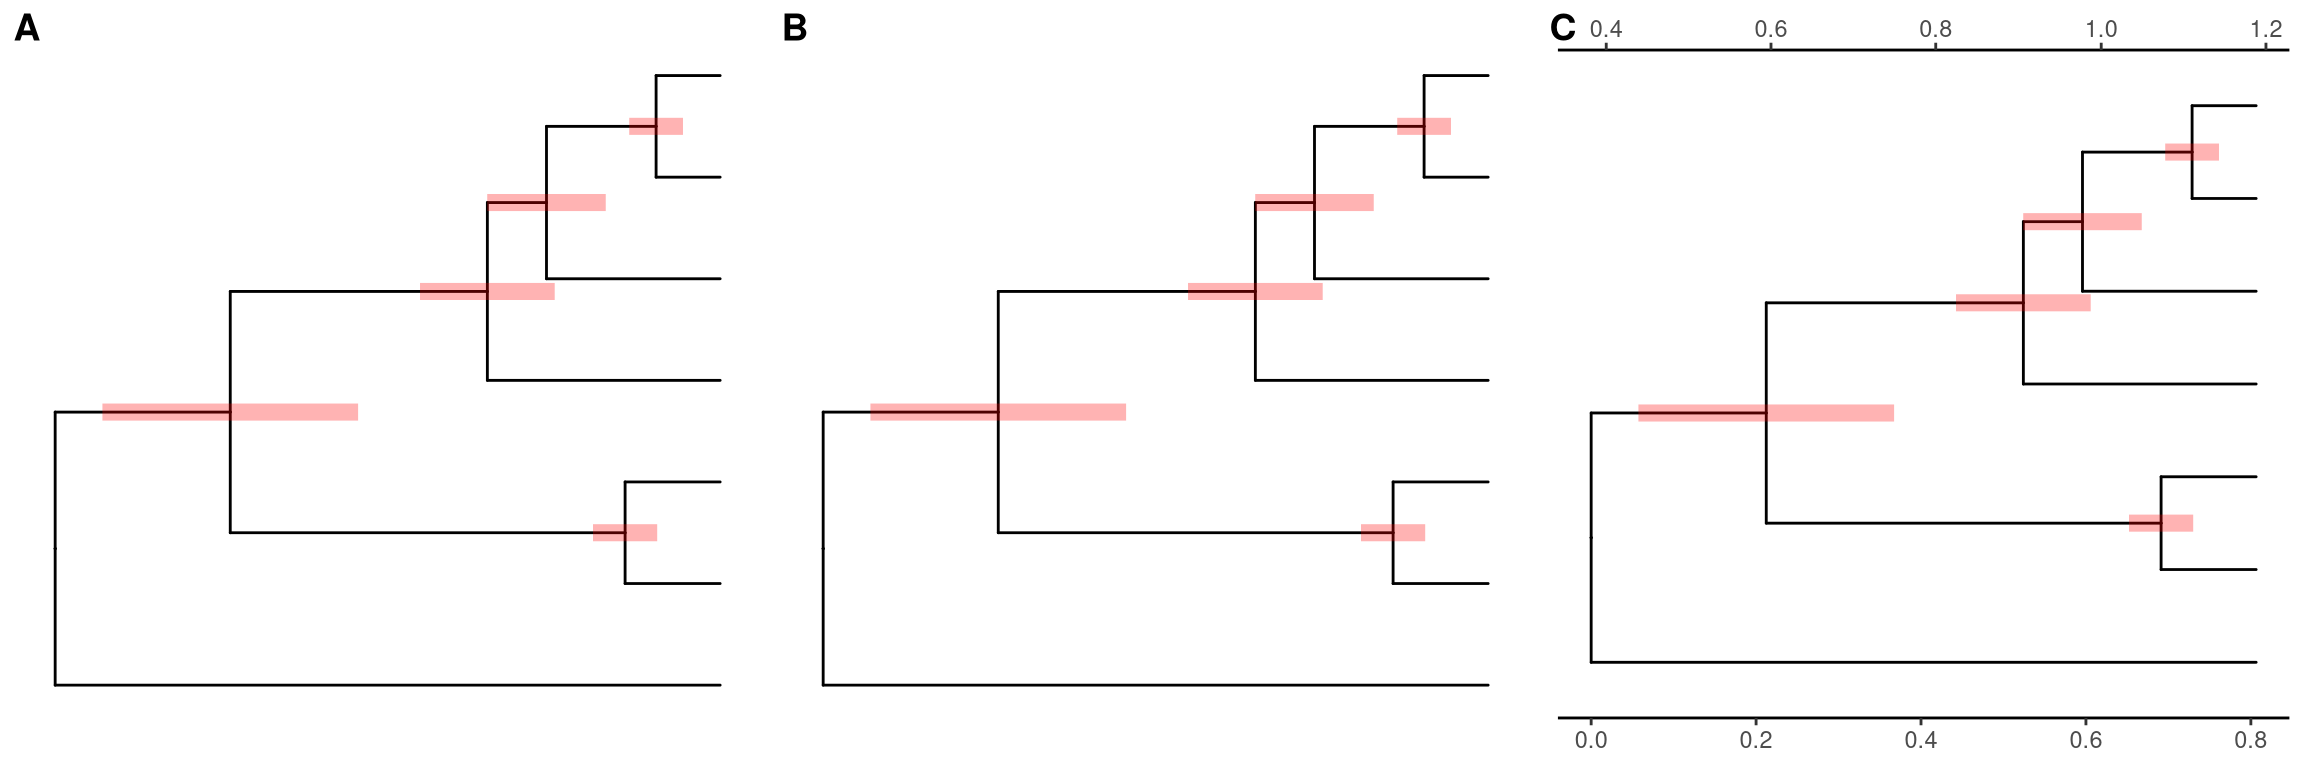 Displaying uncertainty of evolutoinary inference. The center (mean value of the range (A) or estimated value (B)) is anchor to the tree nodes. A second x axis was used for range scaling (C).